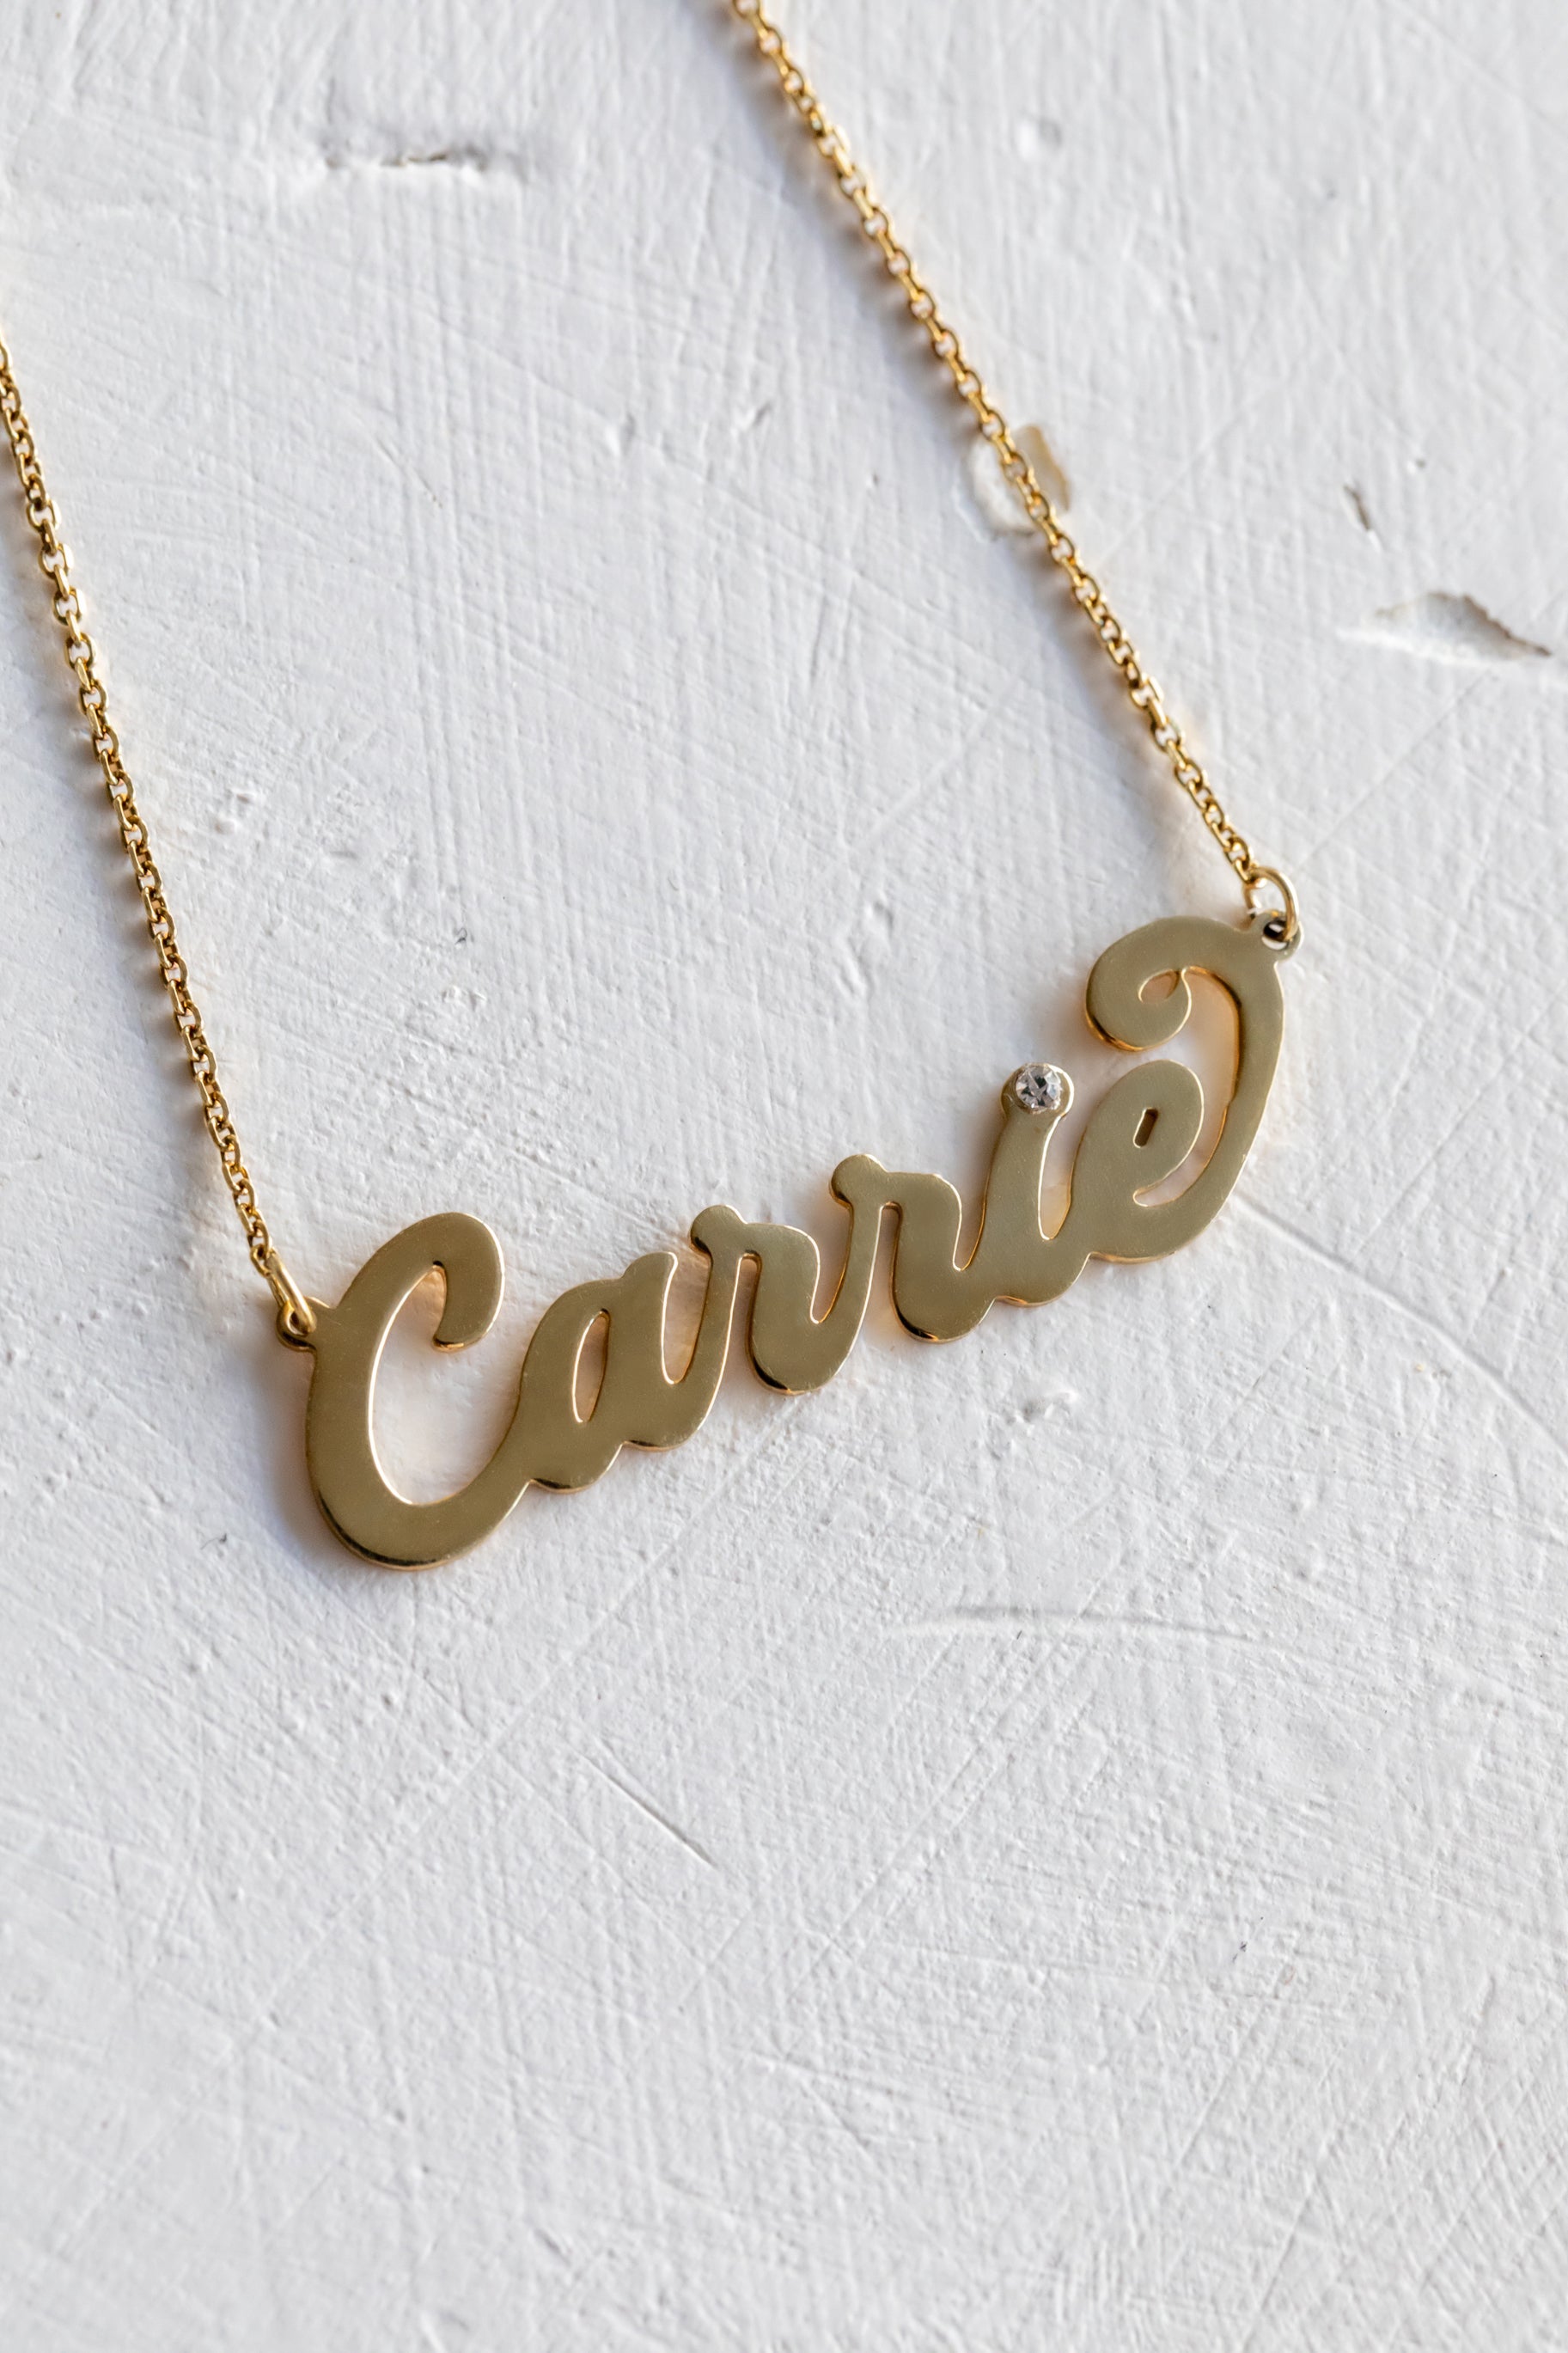 Carrie Name Necklace Solid Gold